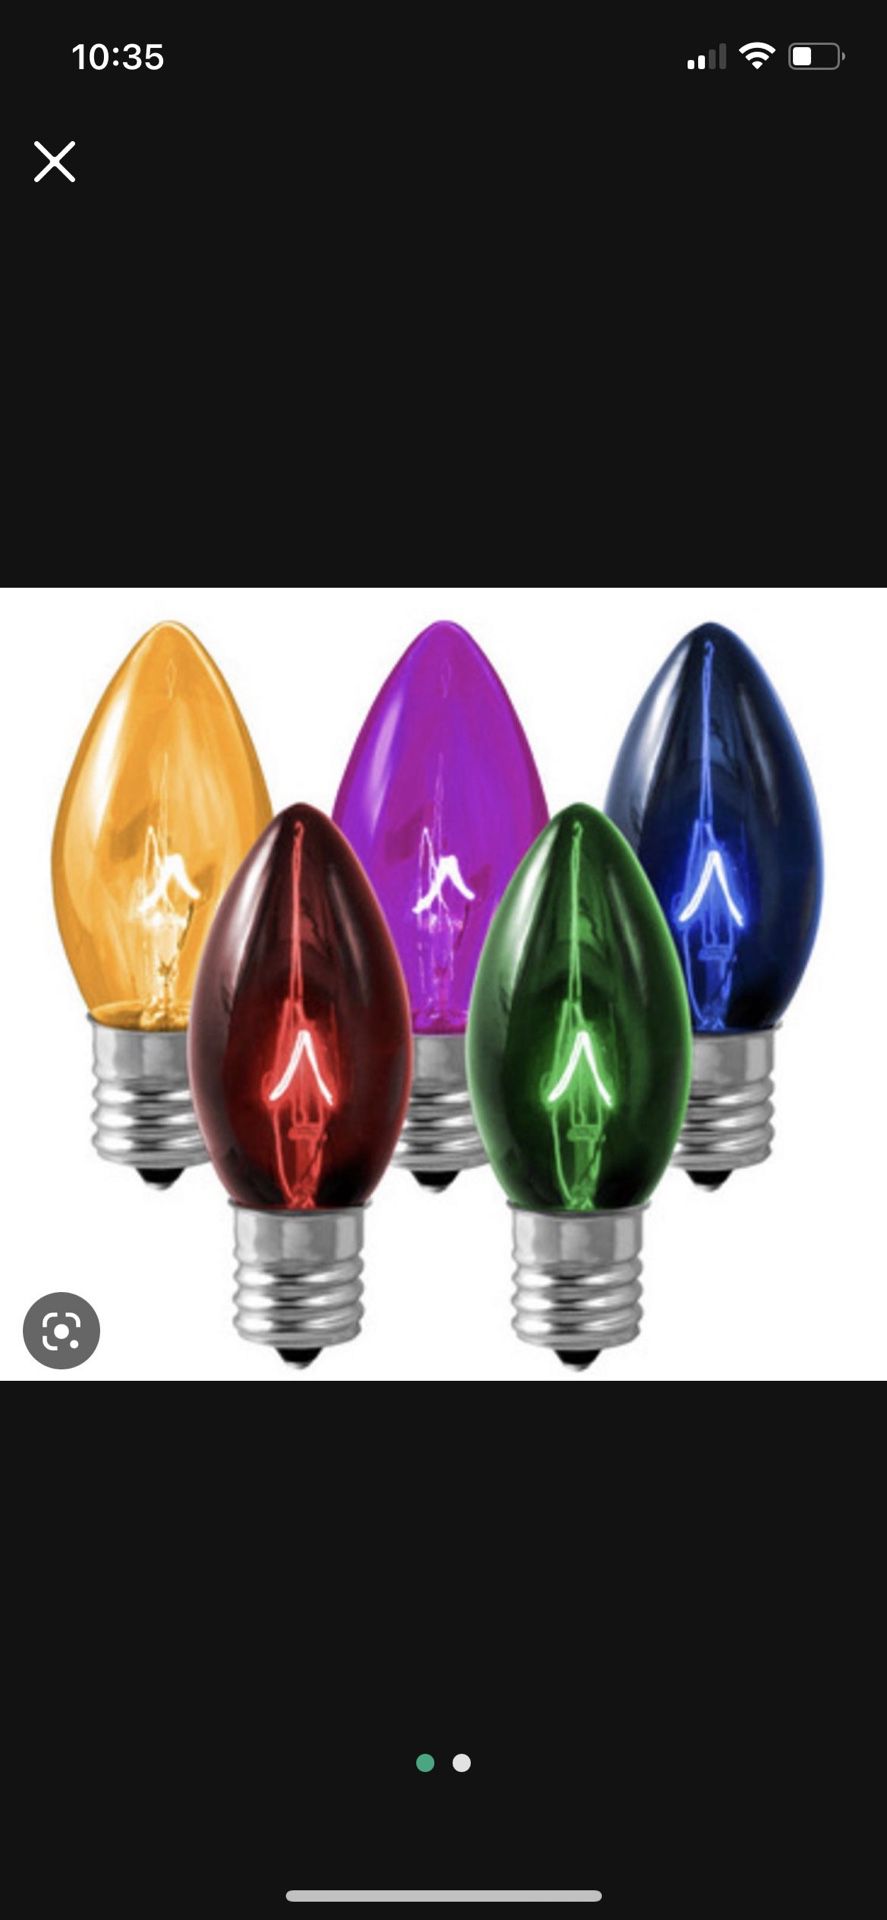 C-7 Multi Colored Bulbs All For 10.00